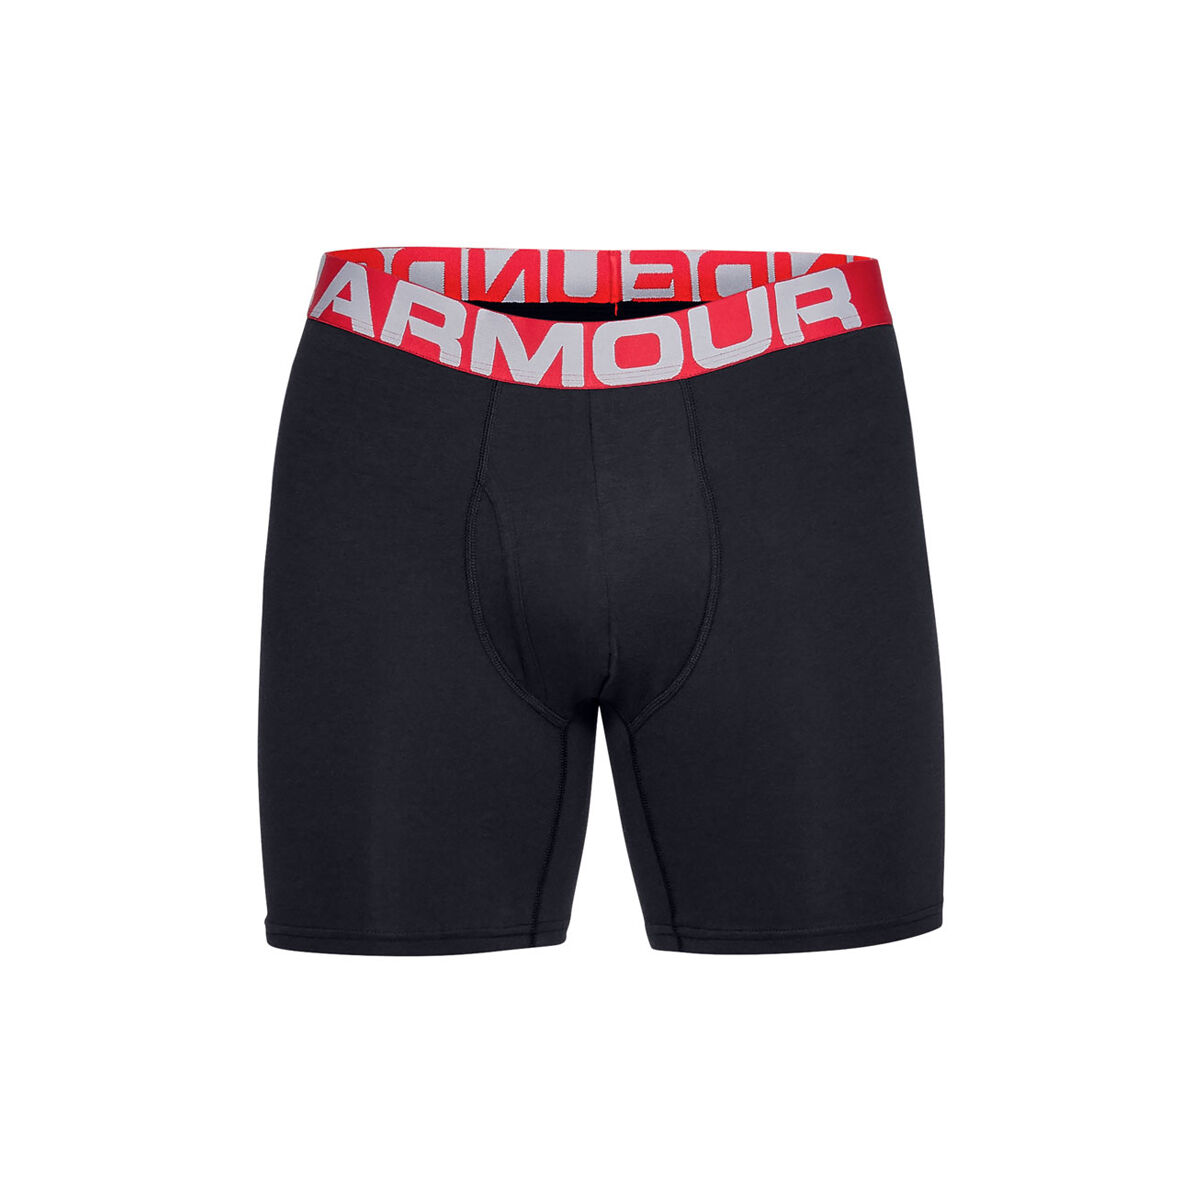 Under Armour Mens Charged Cotton 6-inch 3 Pack